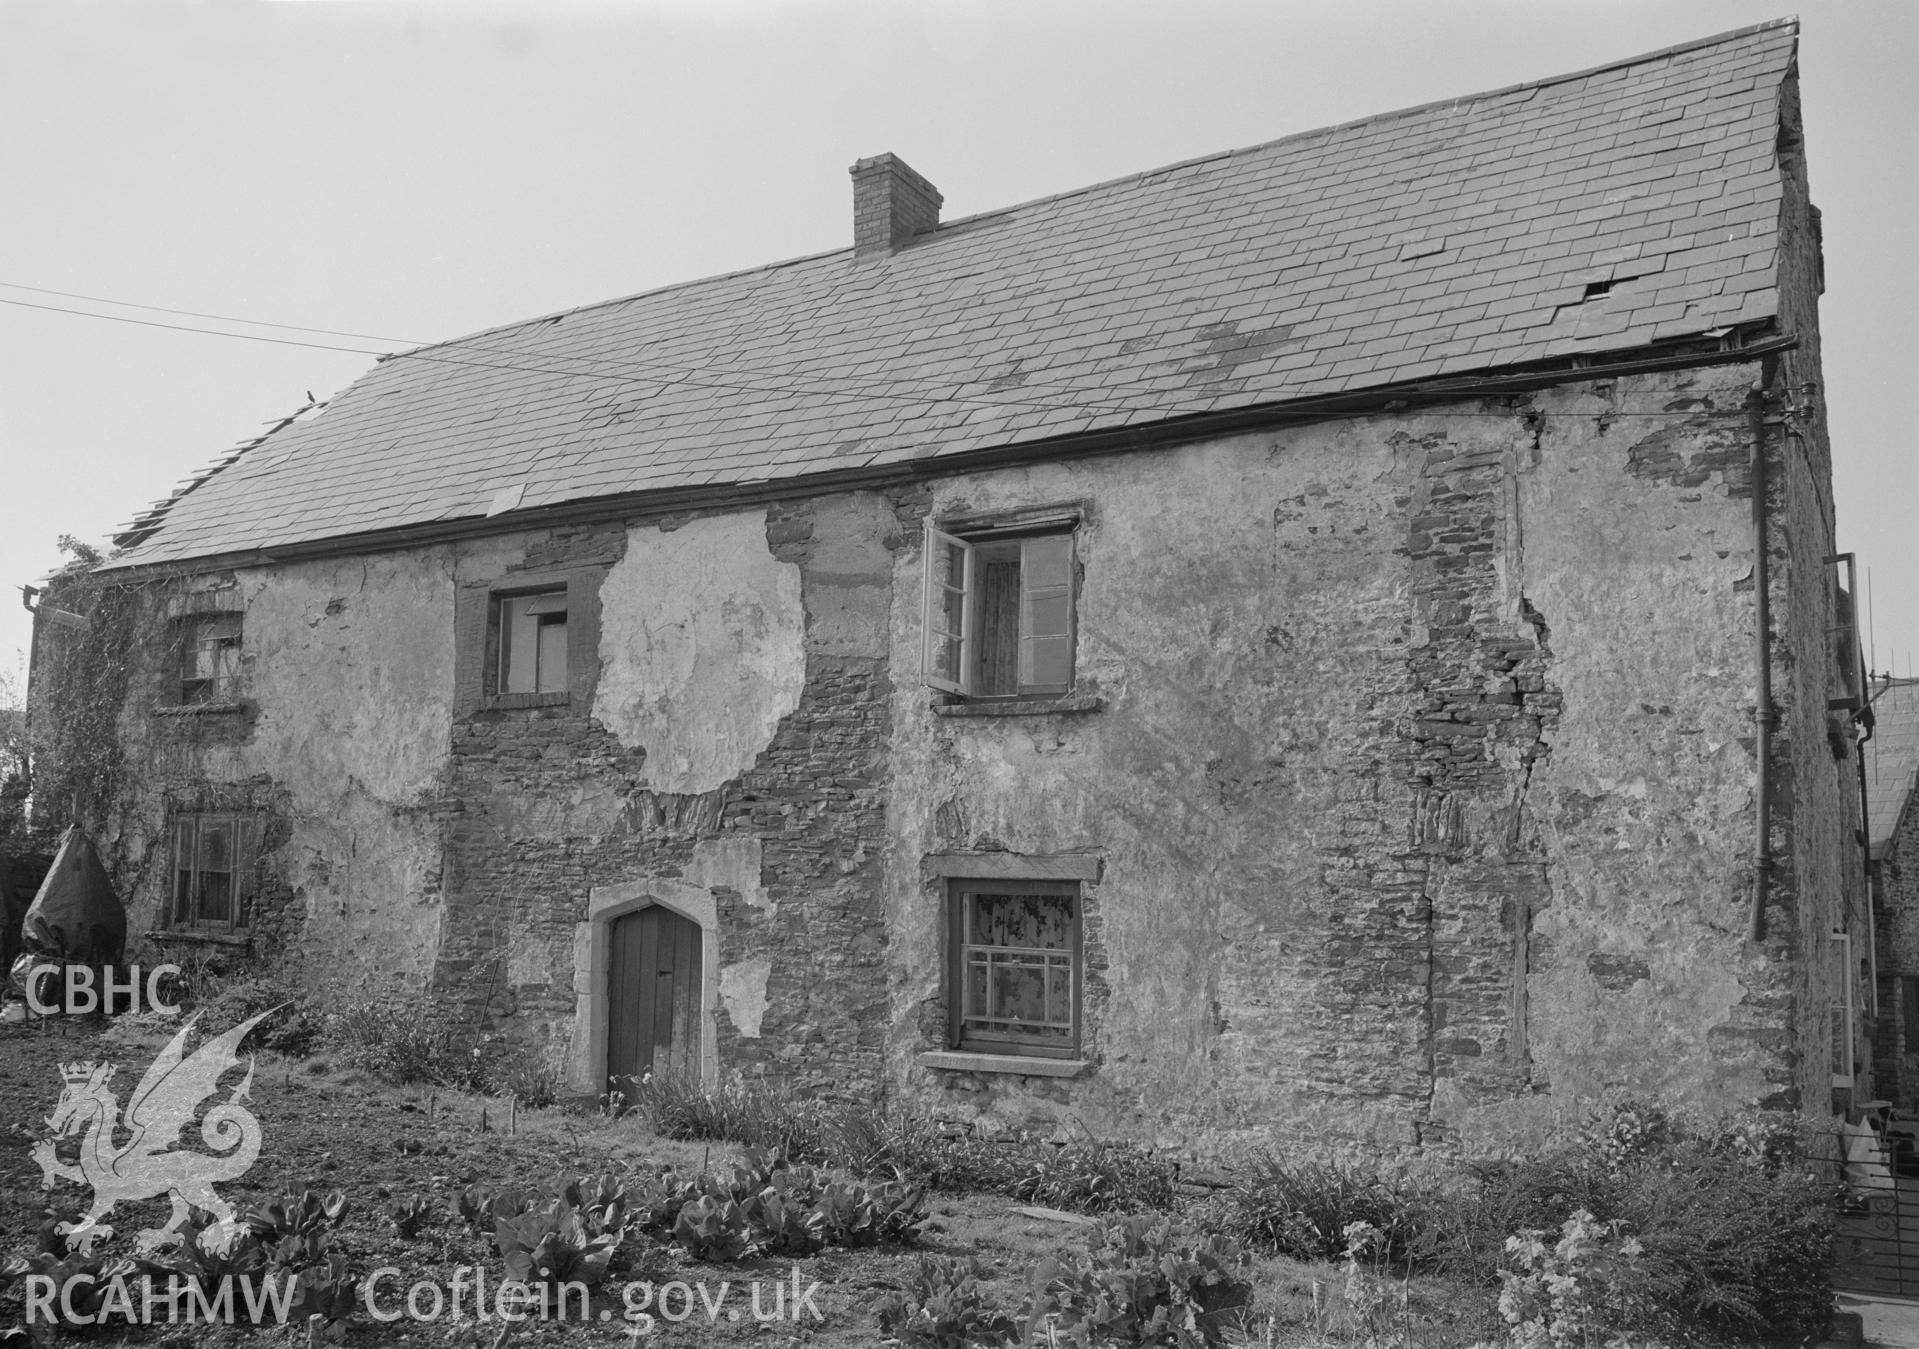 Digital copy of a black and white negative showing Ty'n y Waun, Bettws.